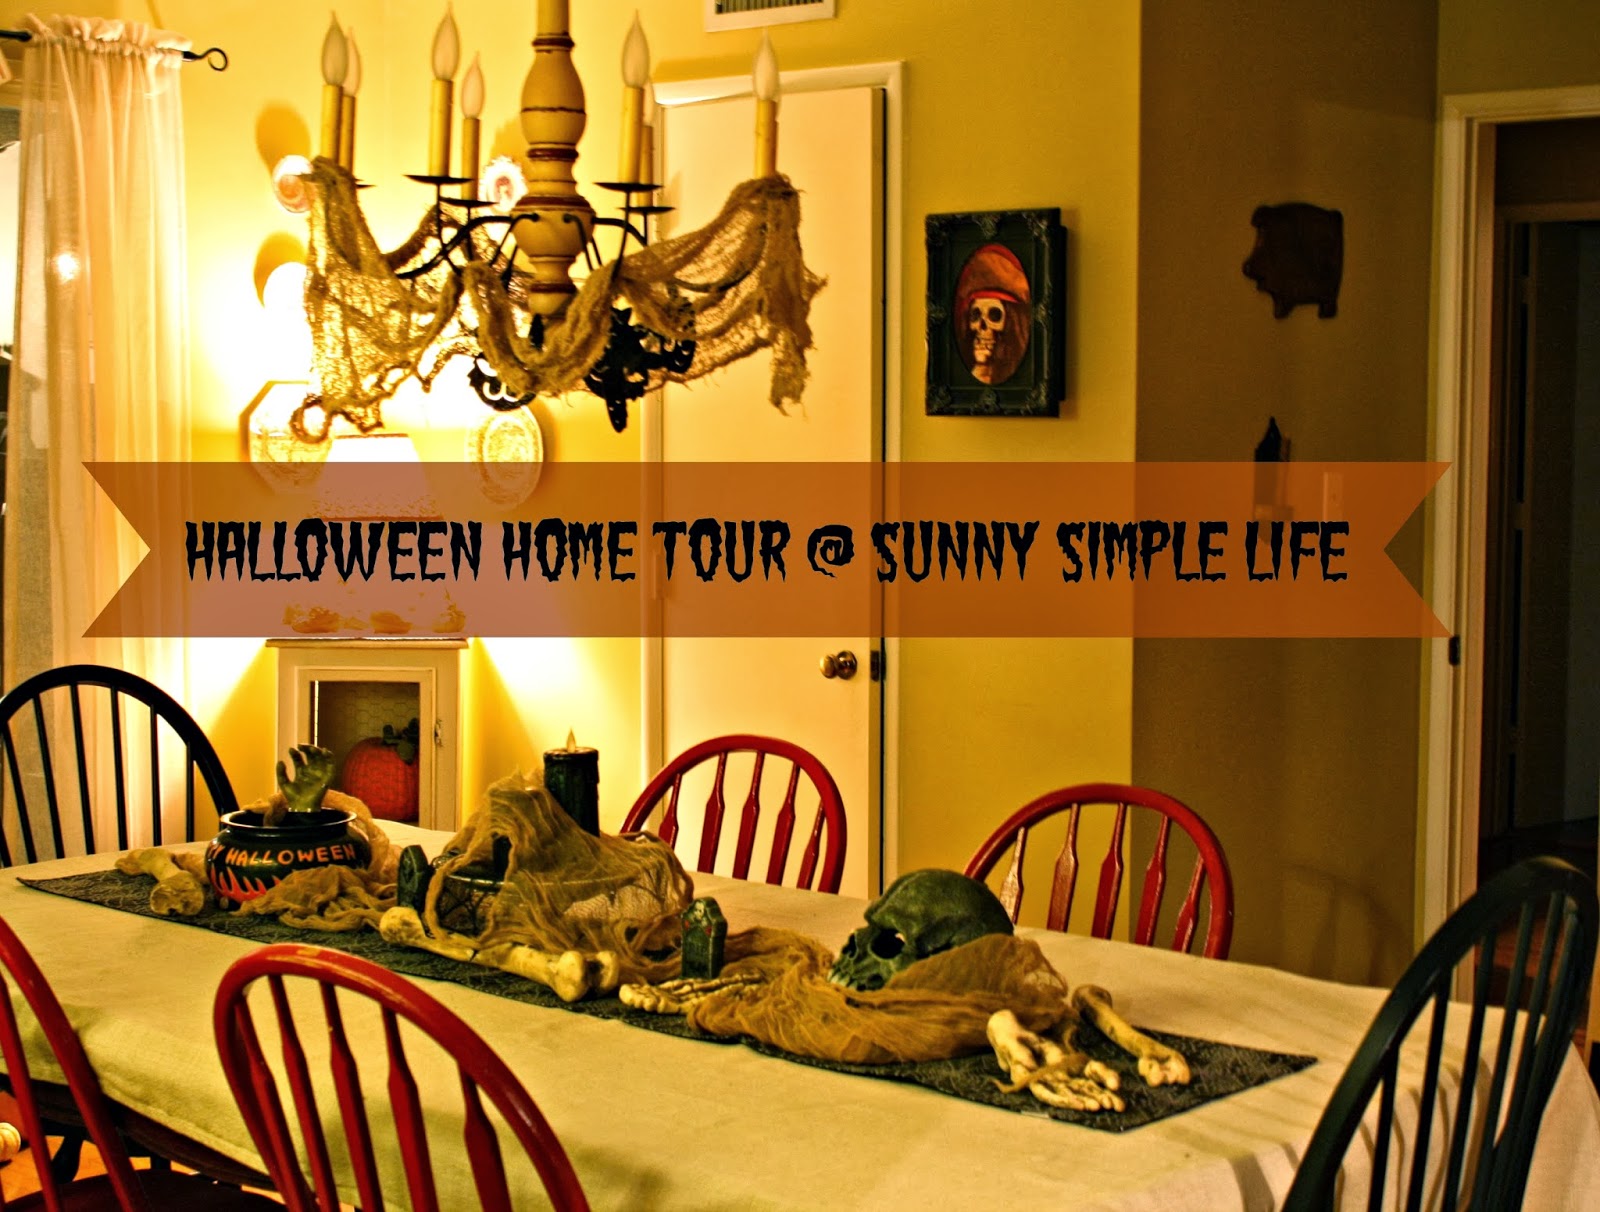 Sunny Simple Life Halloween Home Tour at Sunny Simple Life